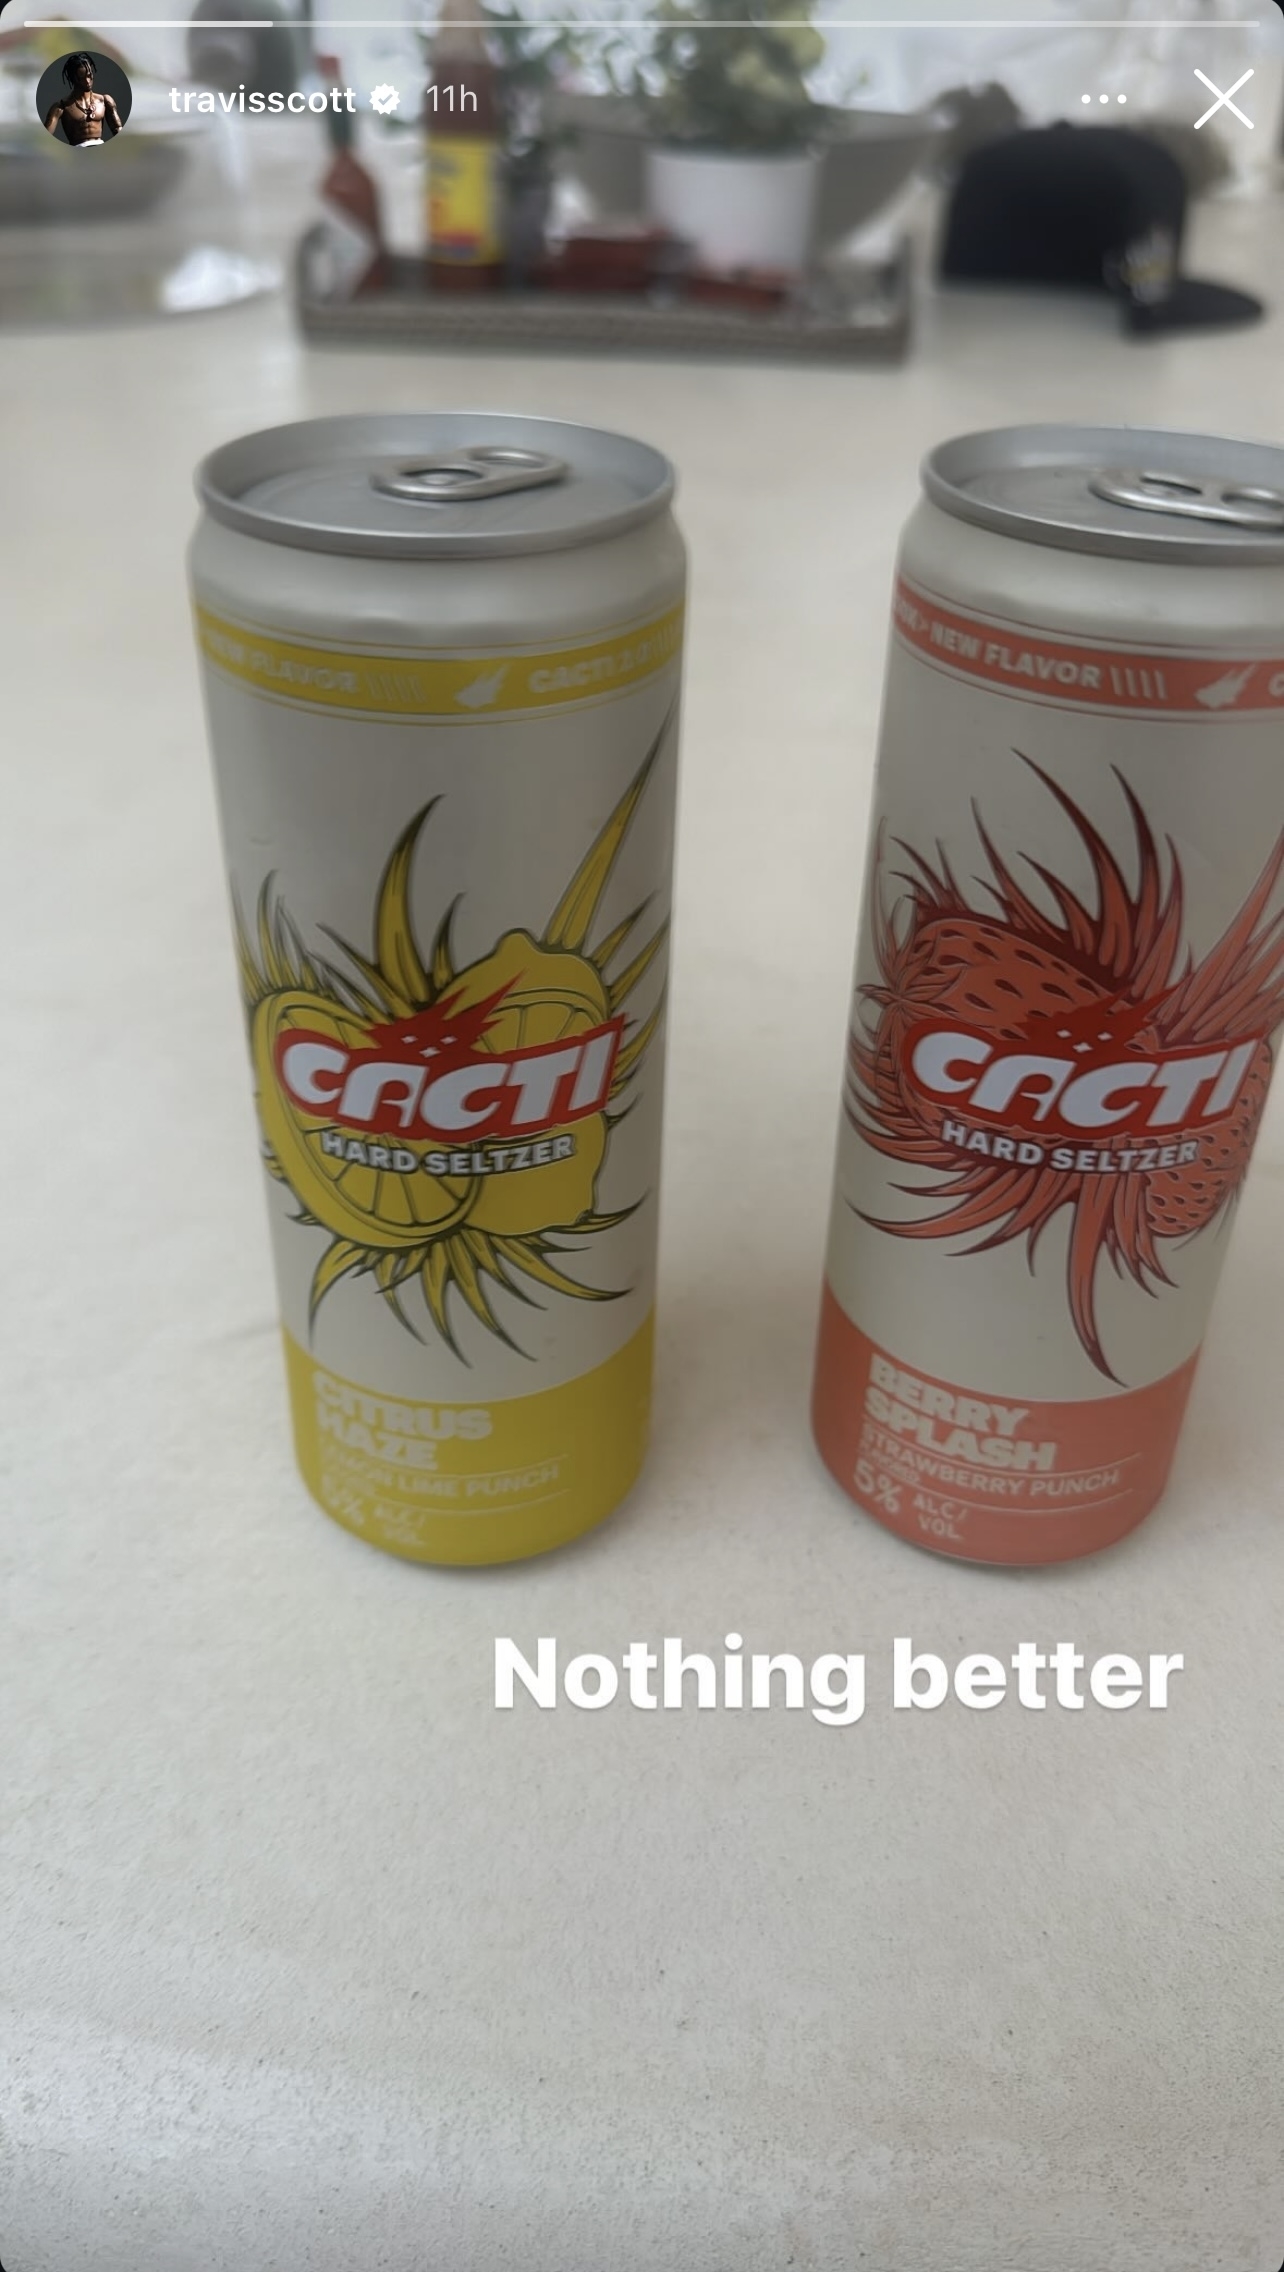 Two cans of &#x27;Cacti&#x27; hard seltzer on a table with text &quot;Nothing better&quot;